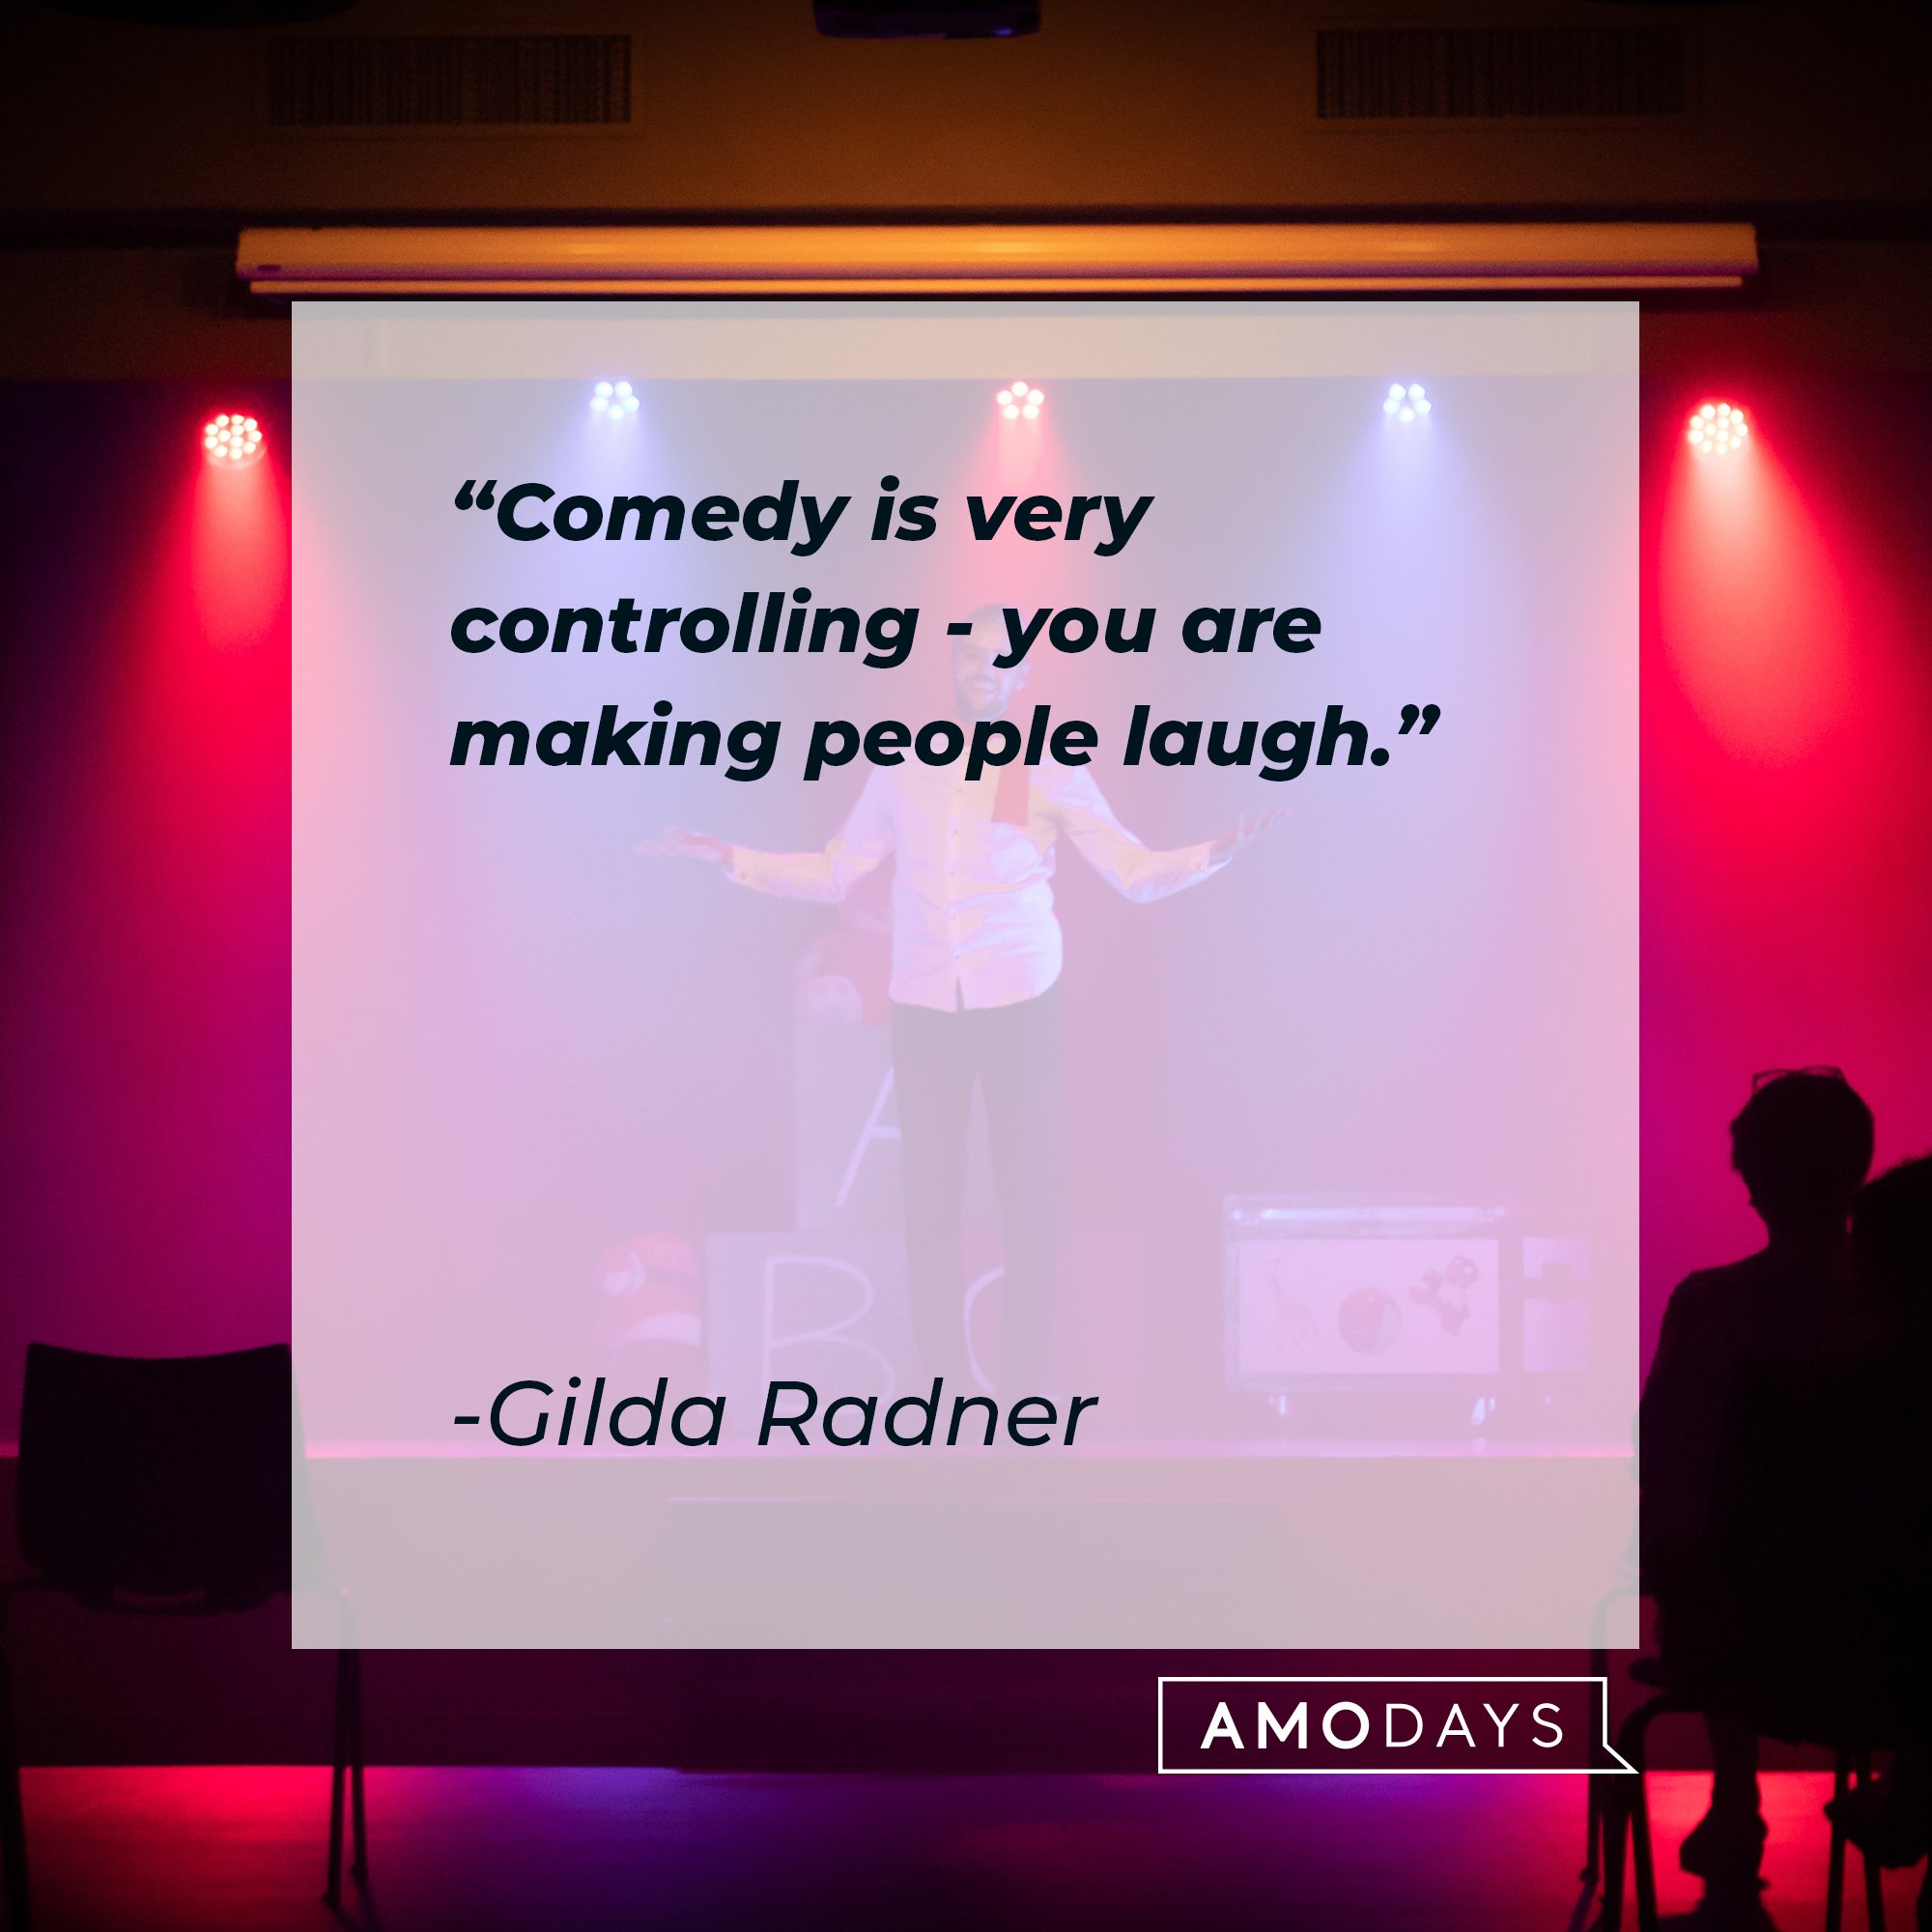 Gilda Radner's quote: "Comedy is very controlling - you are making people laugh."  | Image: Amo